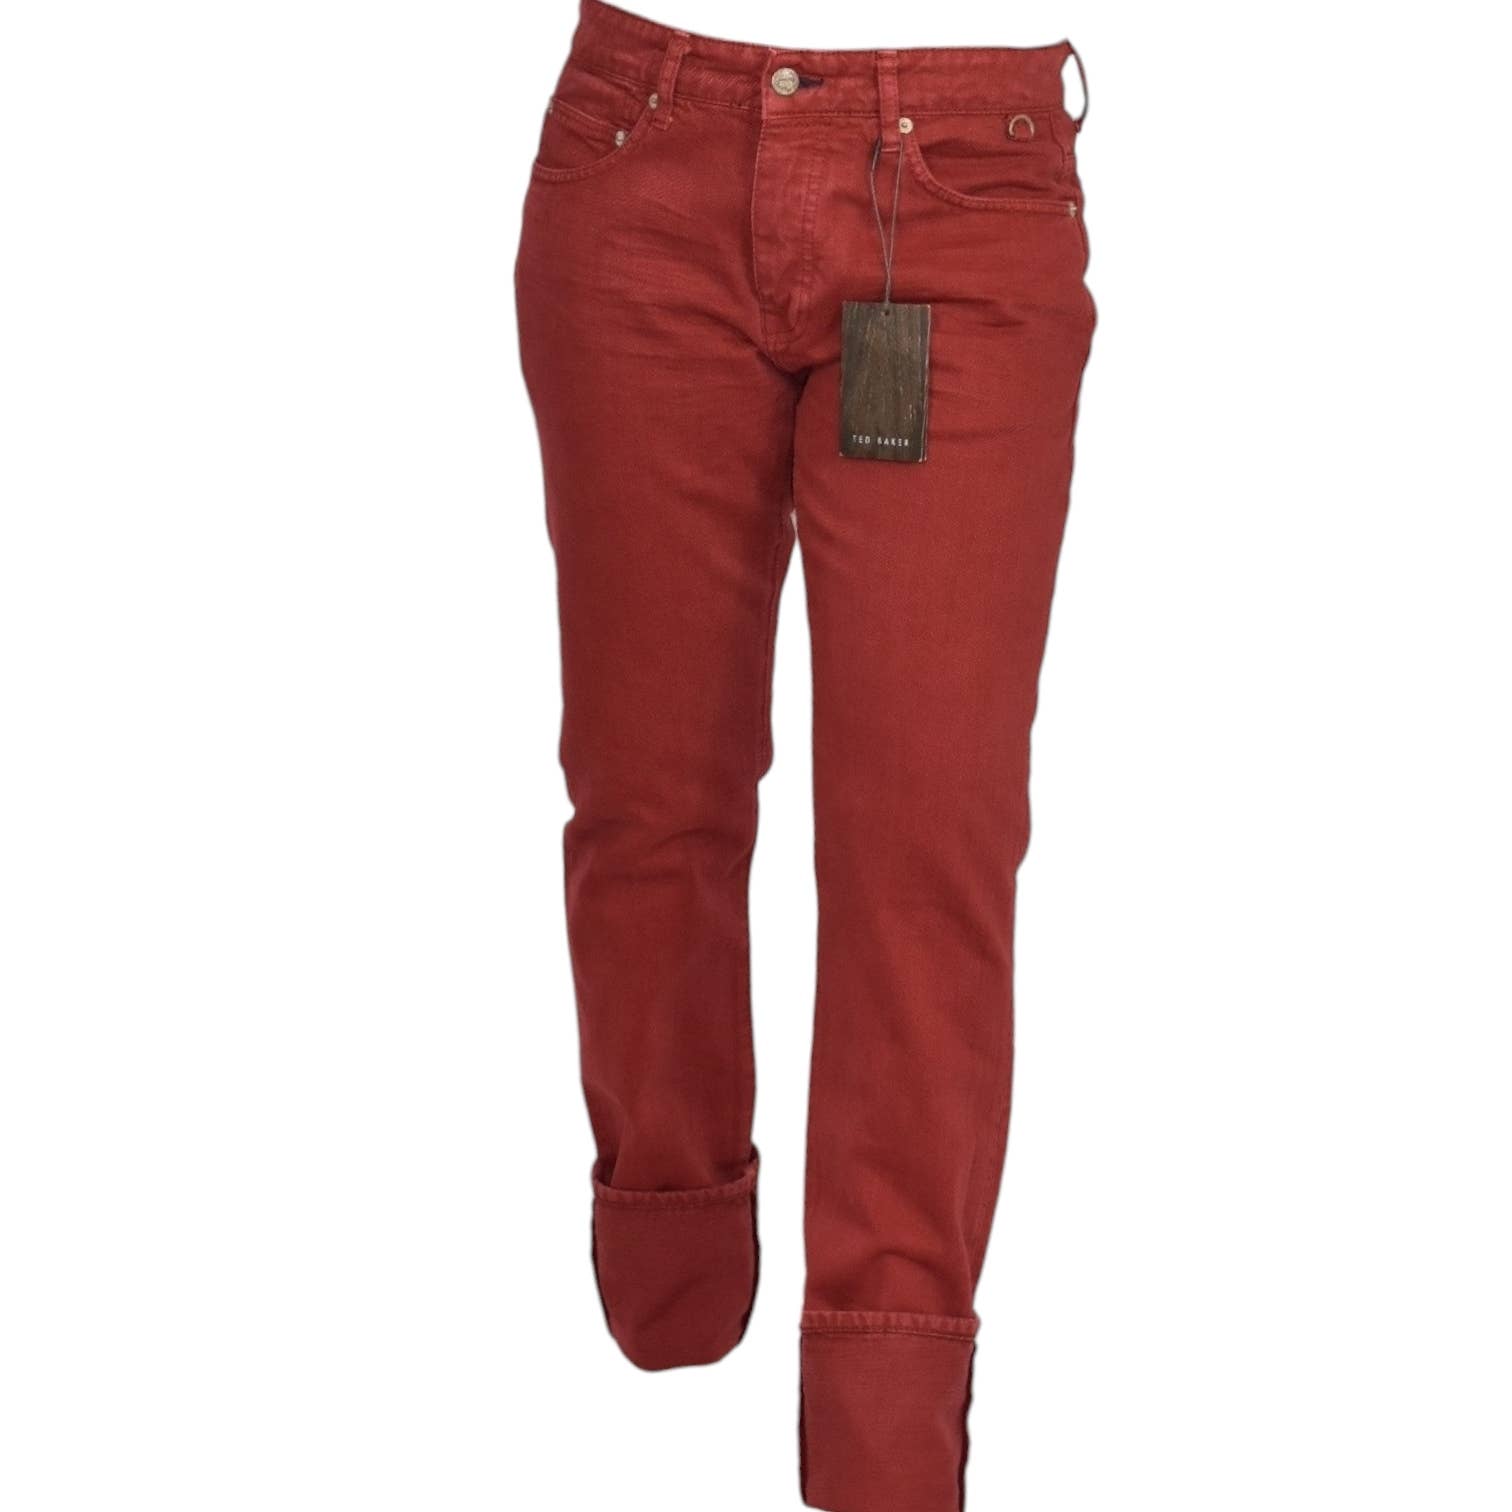 Ted Baker Tinned Sardines Jeans Red Denim Button Fly Straight Leg Slim Cotton Size 32 Mens